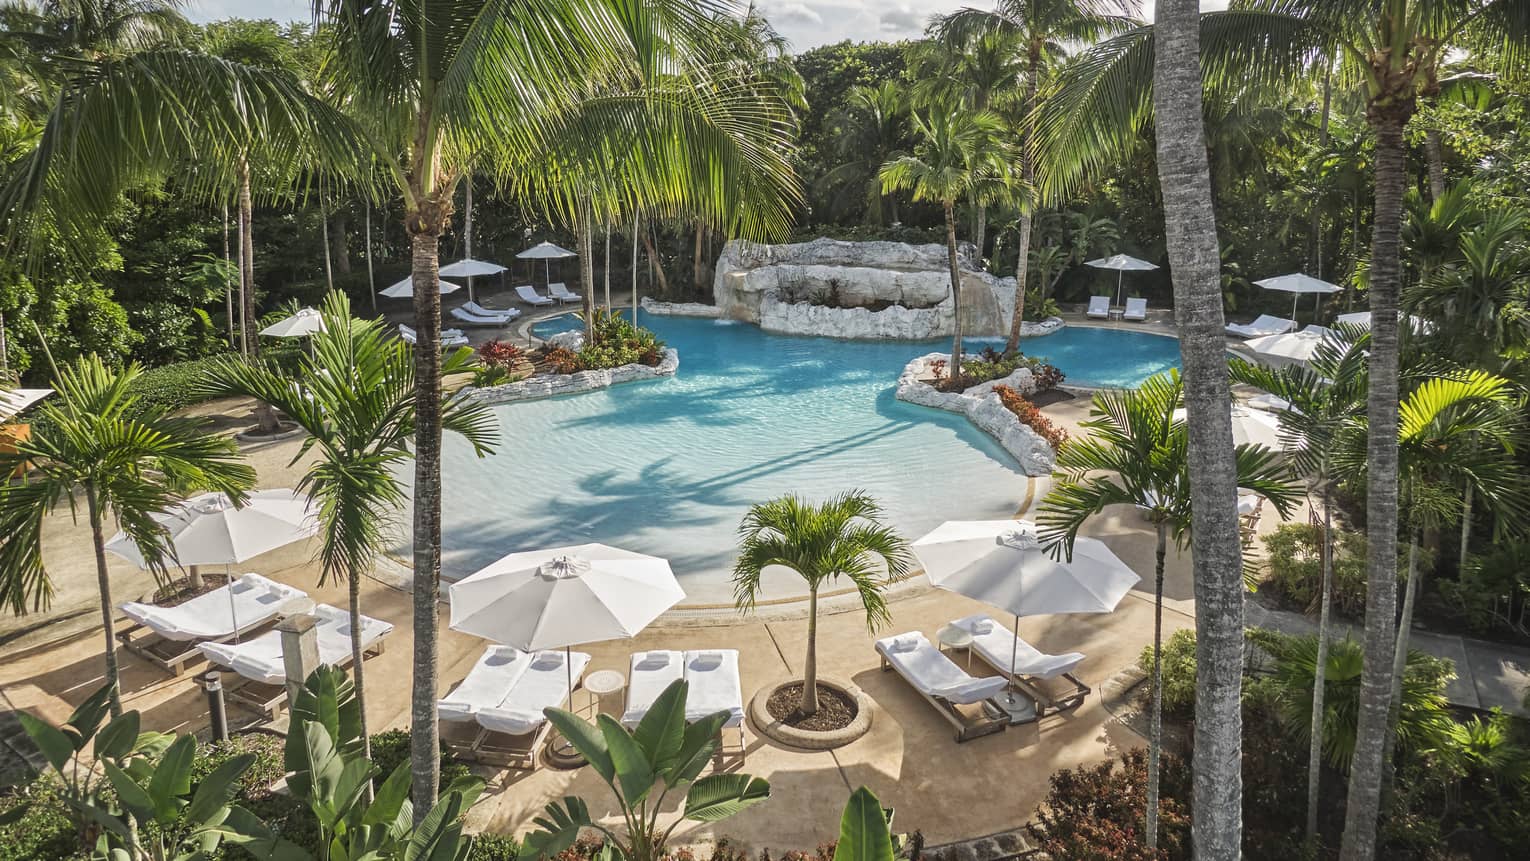 An outdoor pool surrounded by white lounge chairs and palm trees.